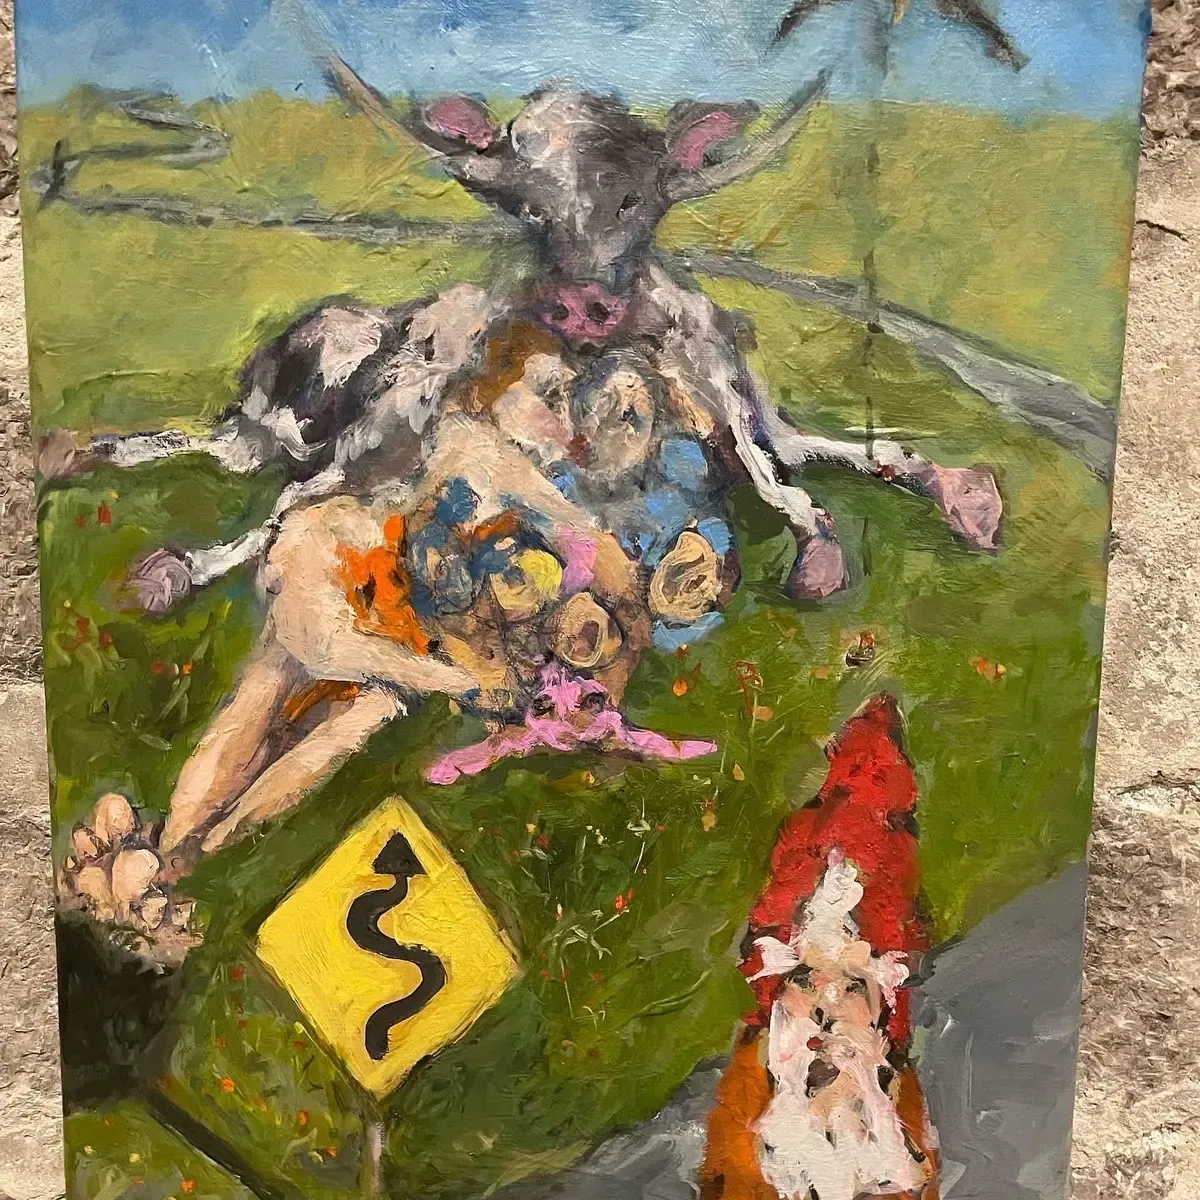 An image of a vibrant painting depicting a cow lying on grass, a couple kissing, a winding road, and a gnome in a red hat.